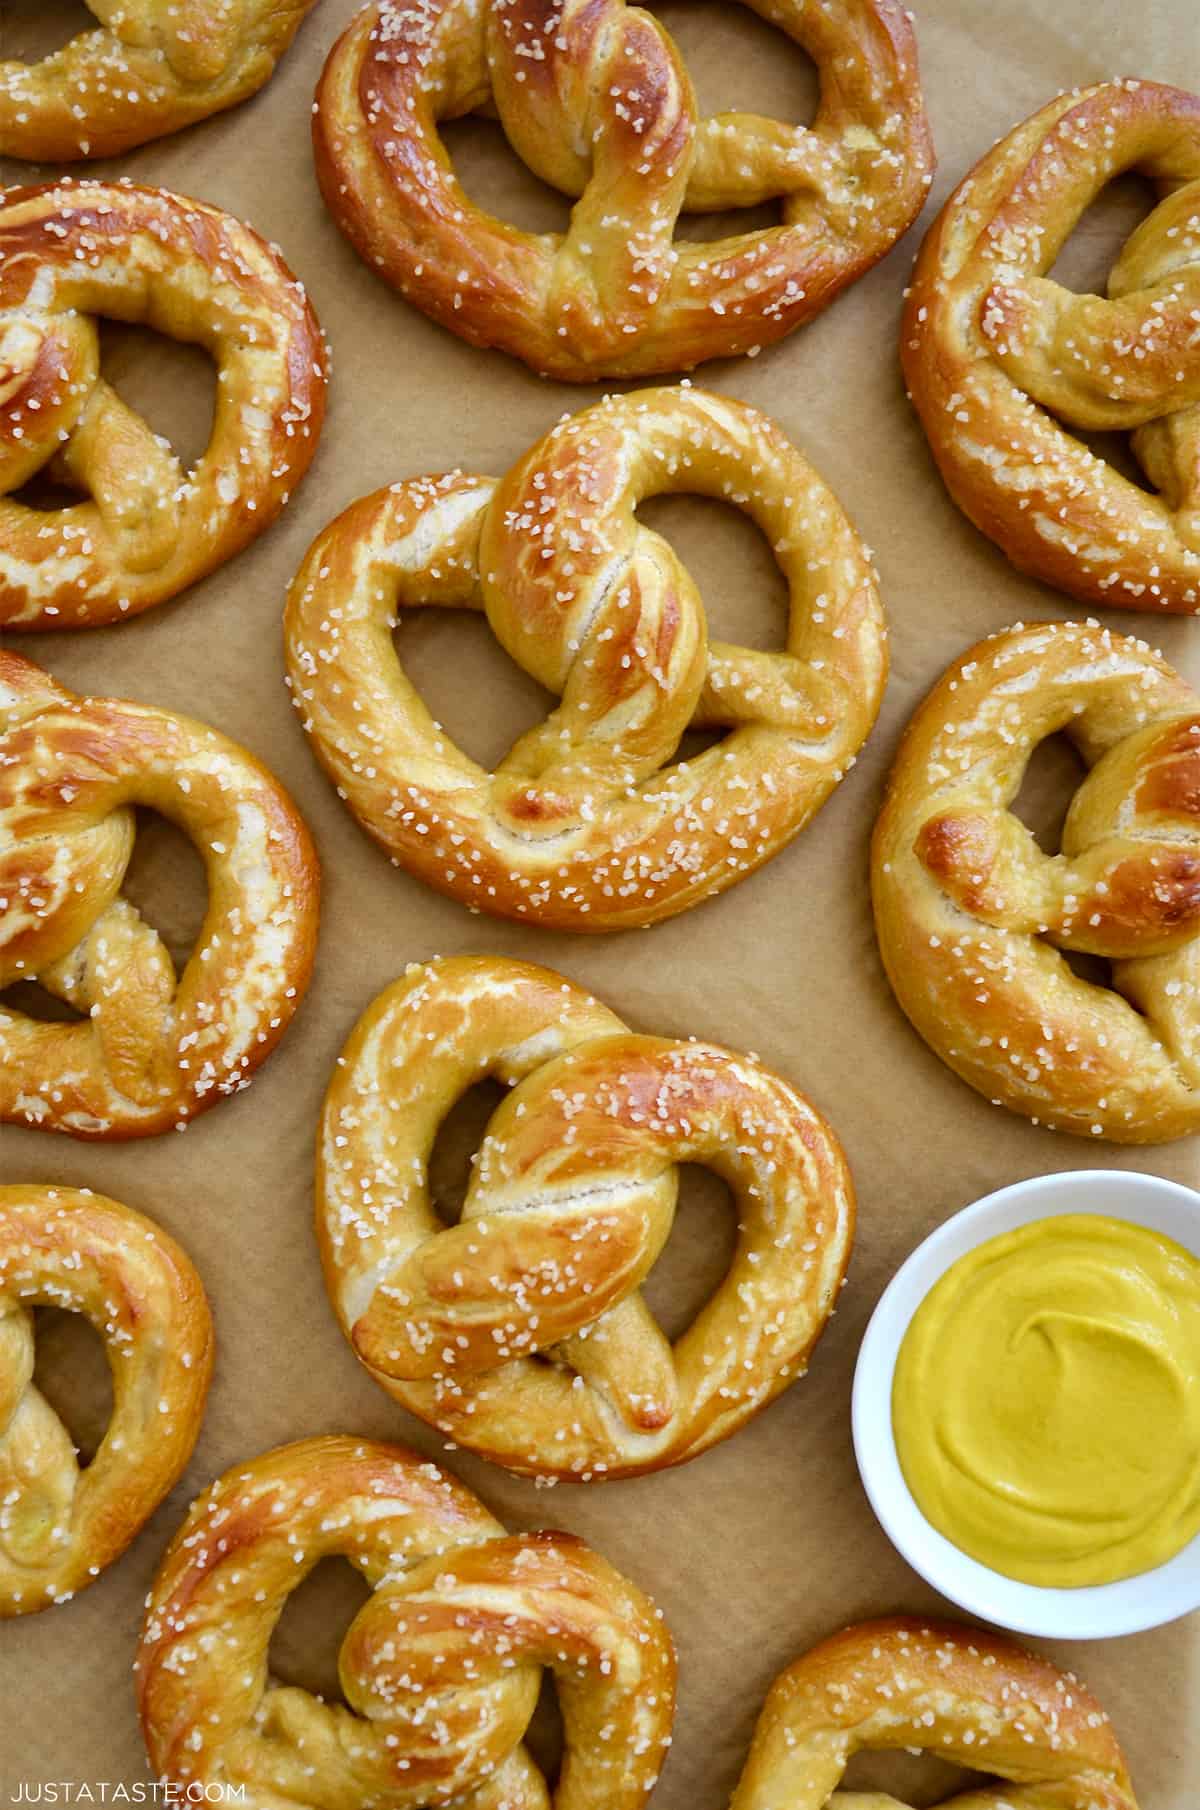 Homemade soft pretzels on brown parchment paper next to a small bowl containing yellow mustard.